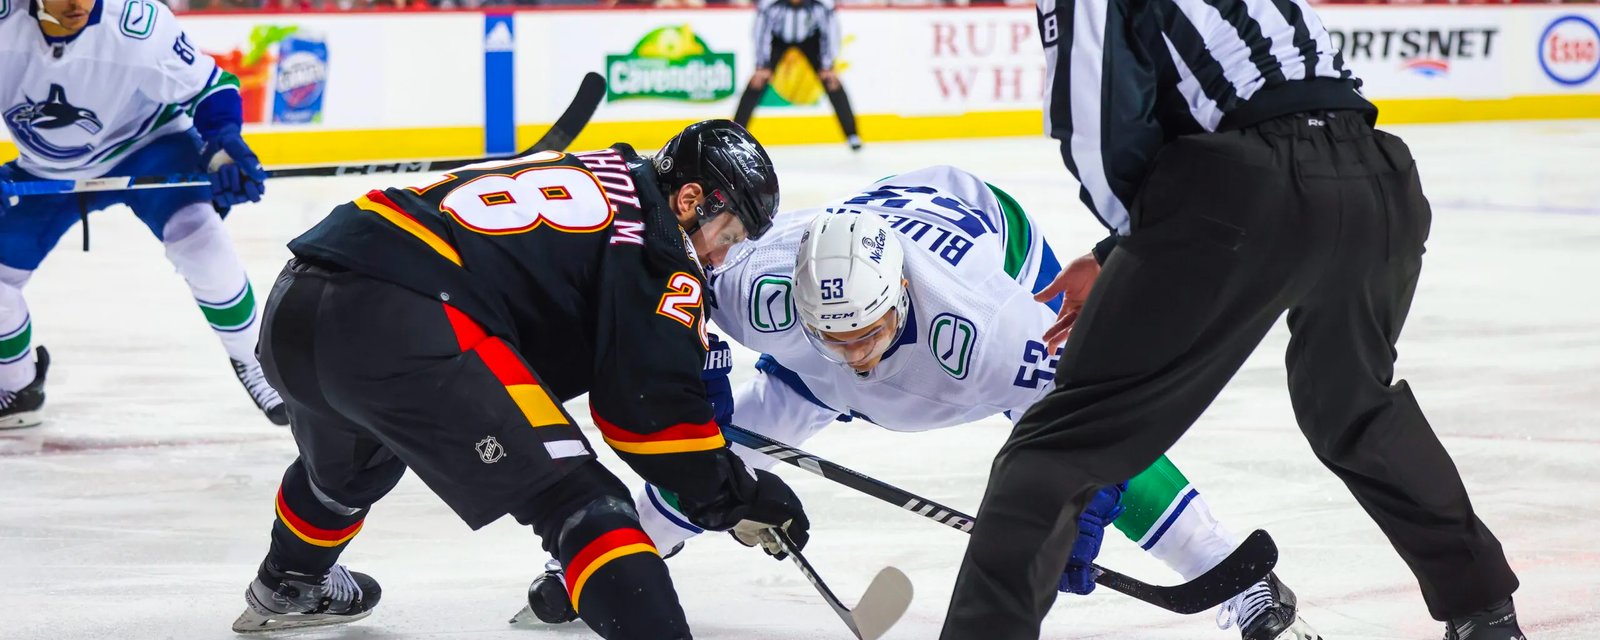 Monster trade appears imminent between Flames and Canucks!